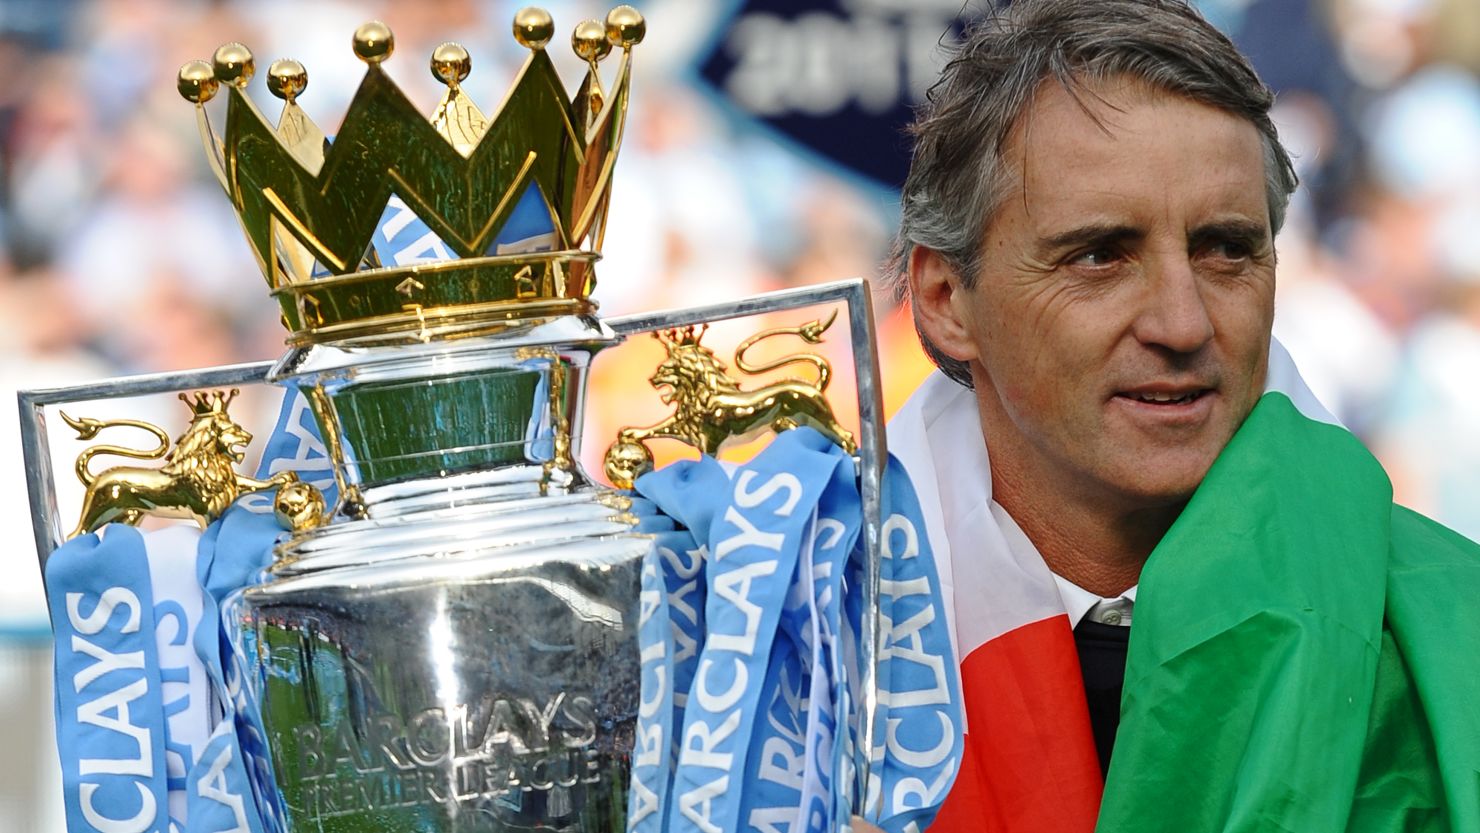 Roberto Mancini led Manchester City to their first English league title for 44 years last season